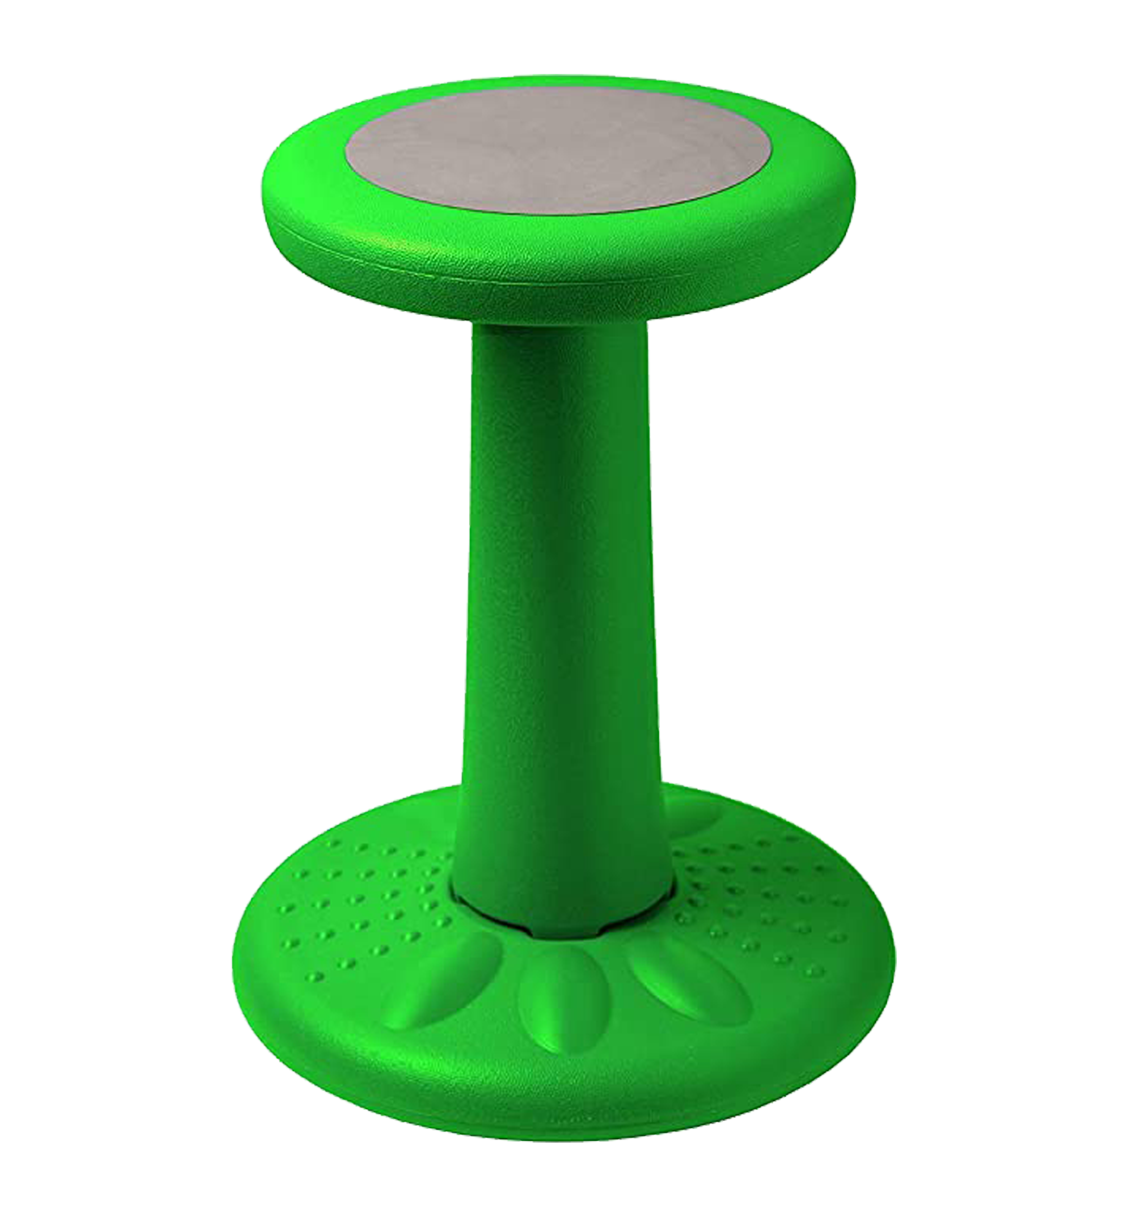 Active Chairs Adjustable Wobble Stool for Kids, Flexible Seating